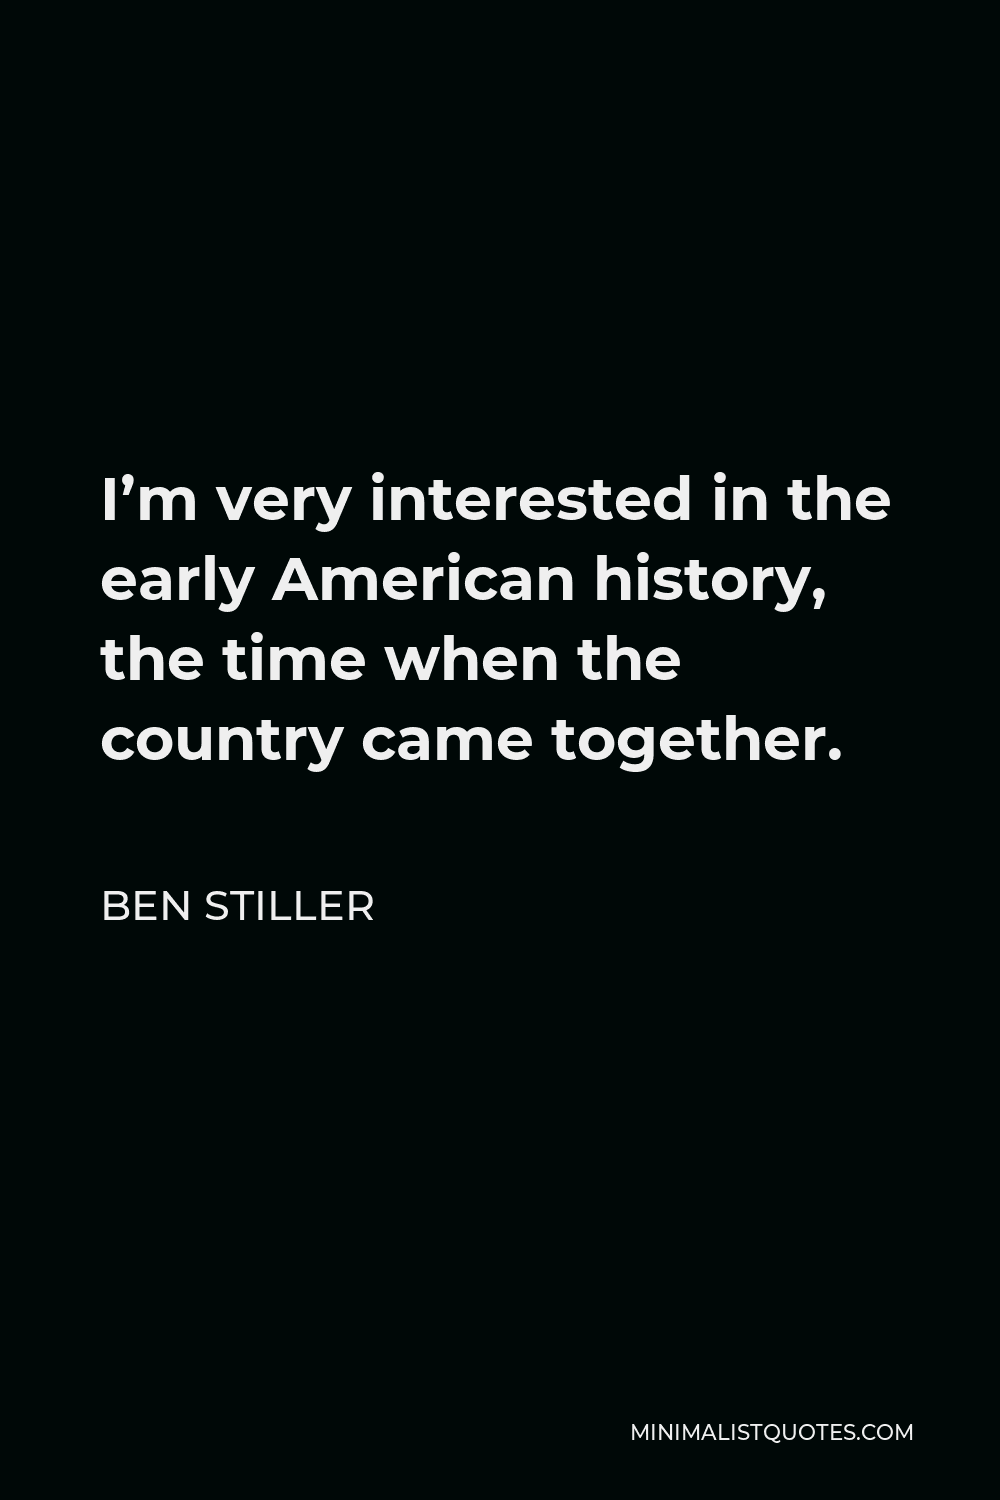 Ben Stiller Quote - I’m very interested in the early American history, the time when the country came together.